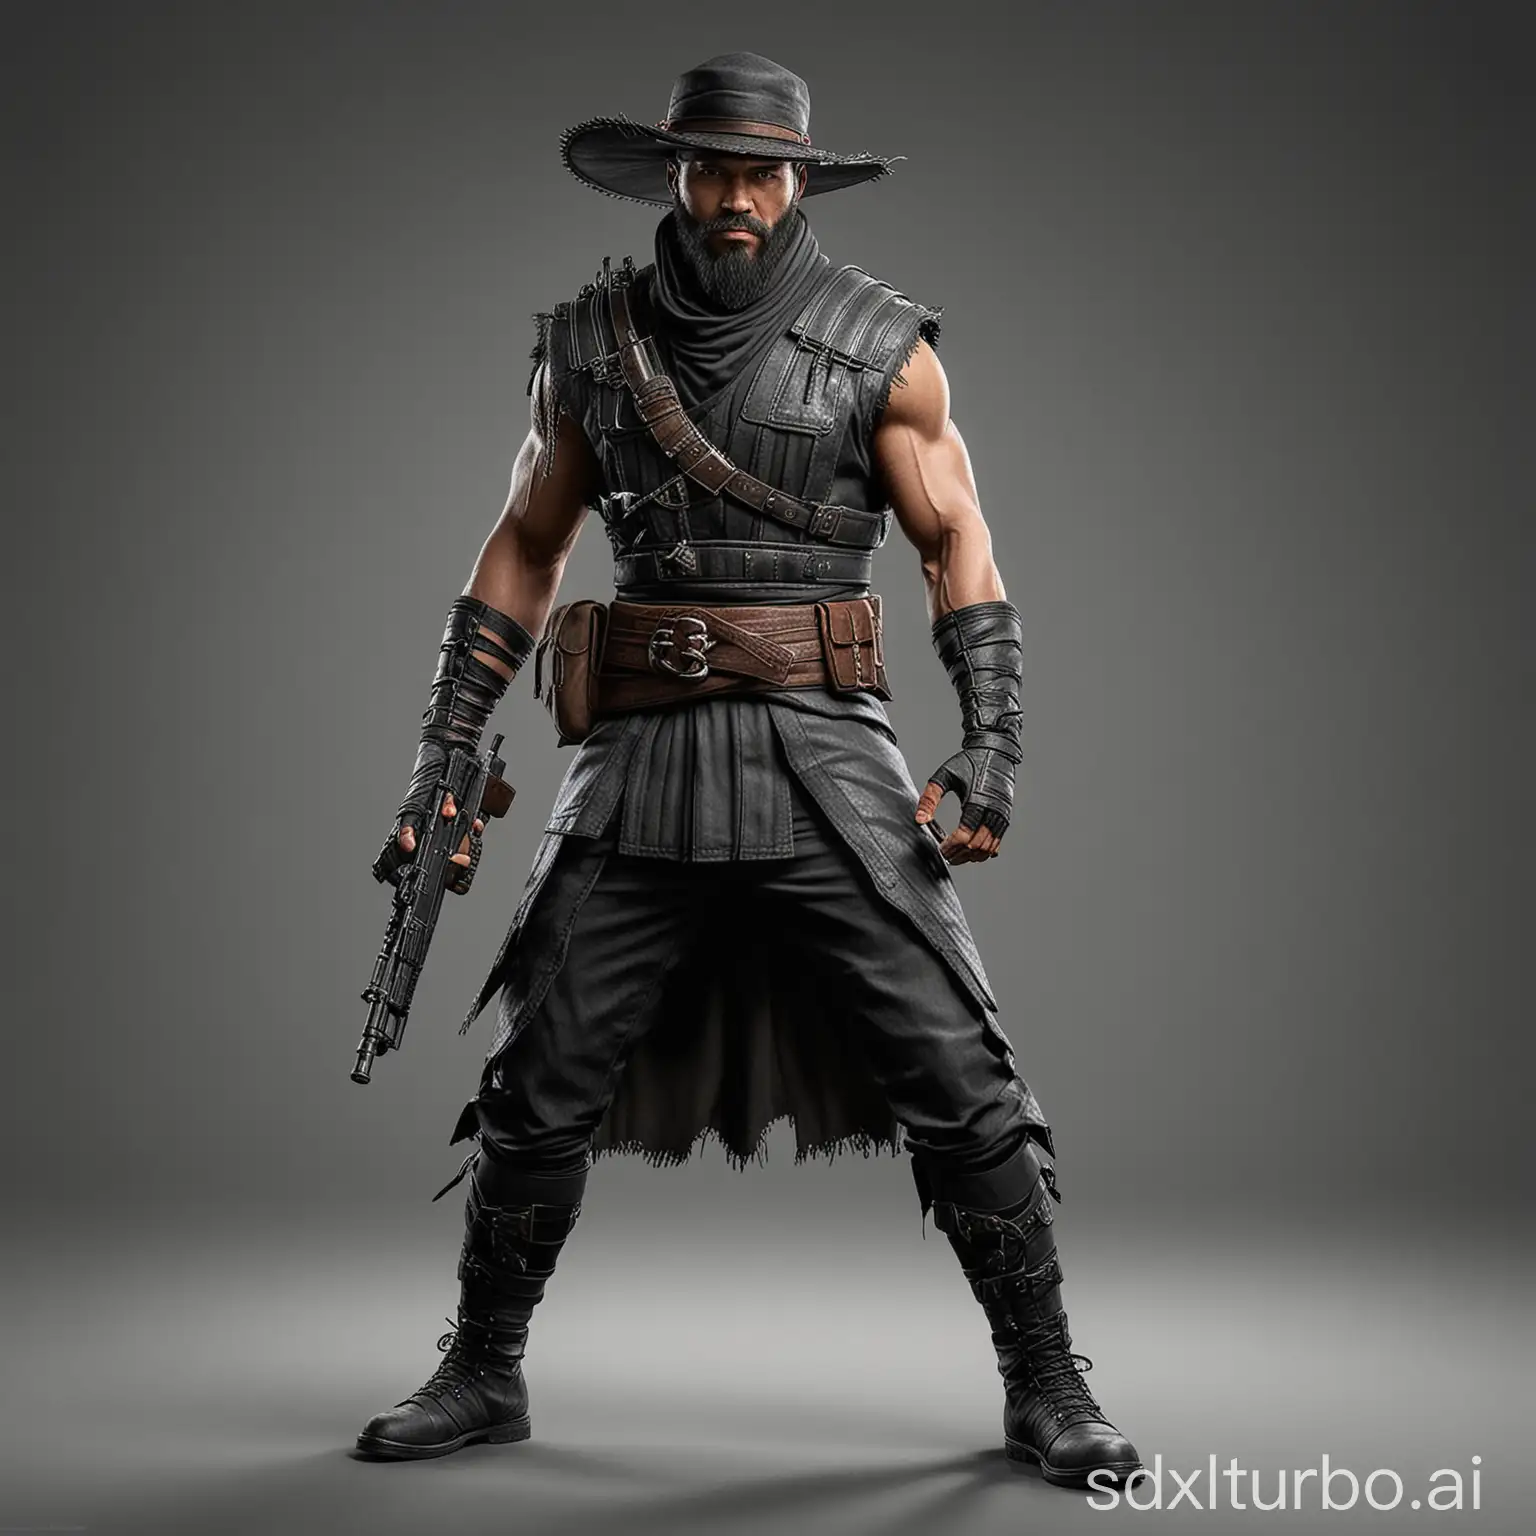 Kung-Lao-from-Mortal-Kombat-Poses-with-PUBG-Assault-Rifle-in-Full-Armor-Portrait